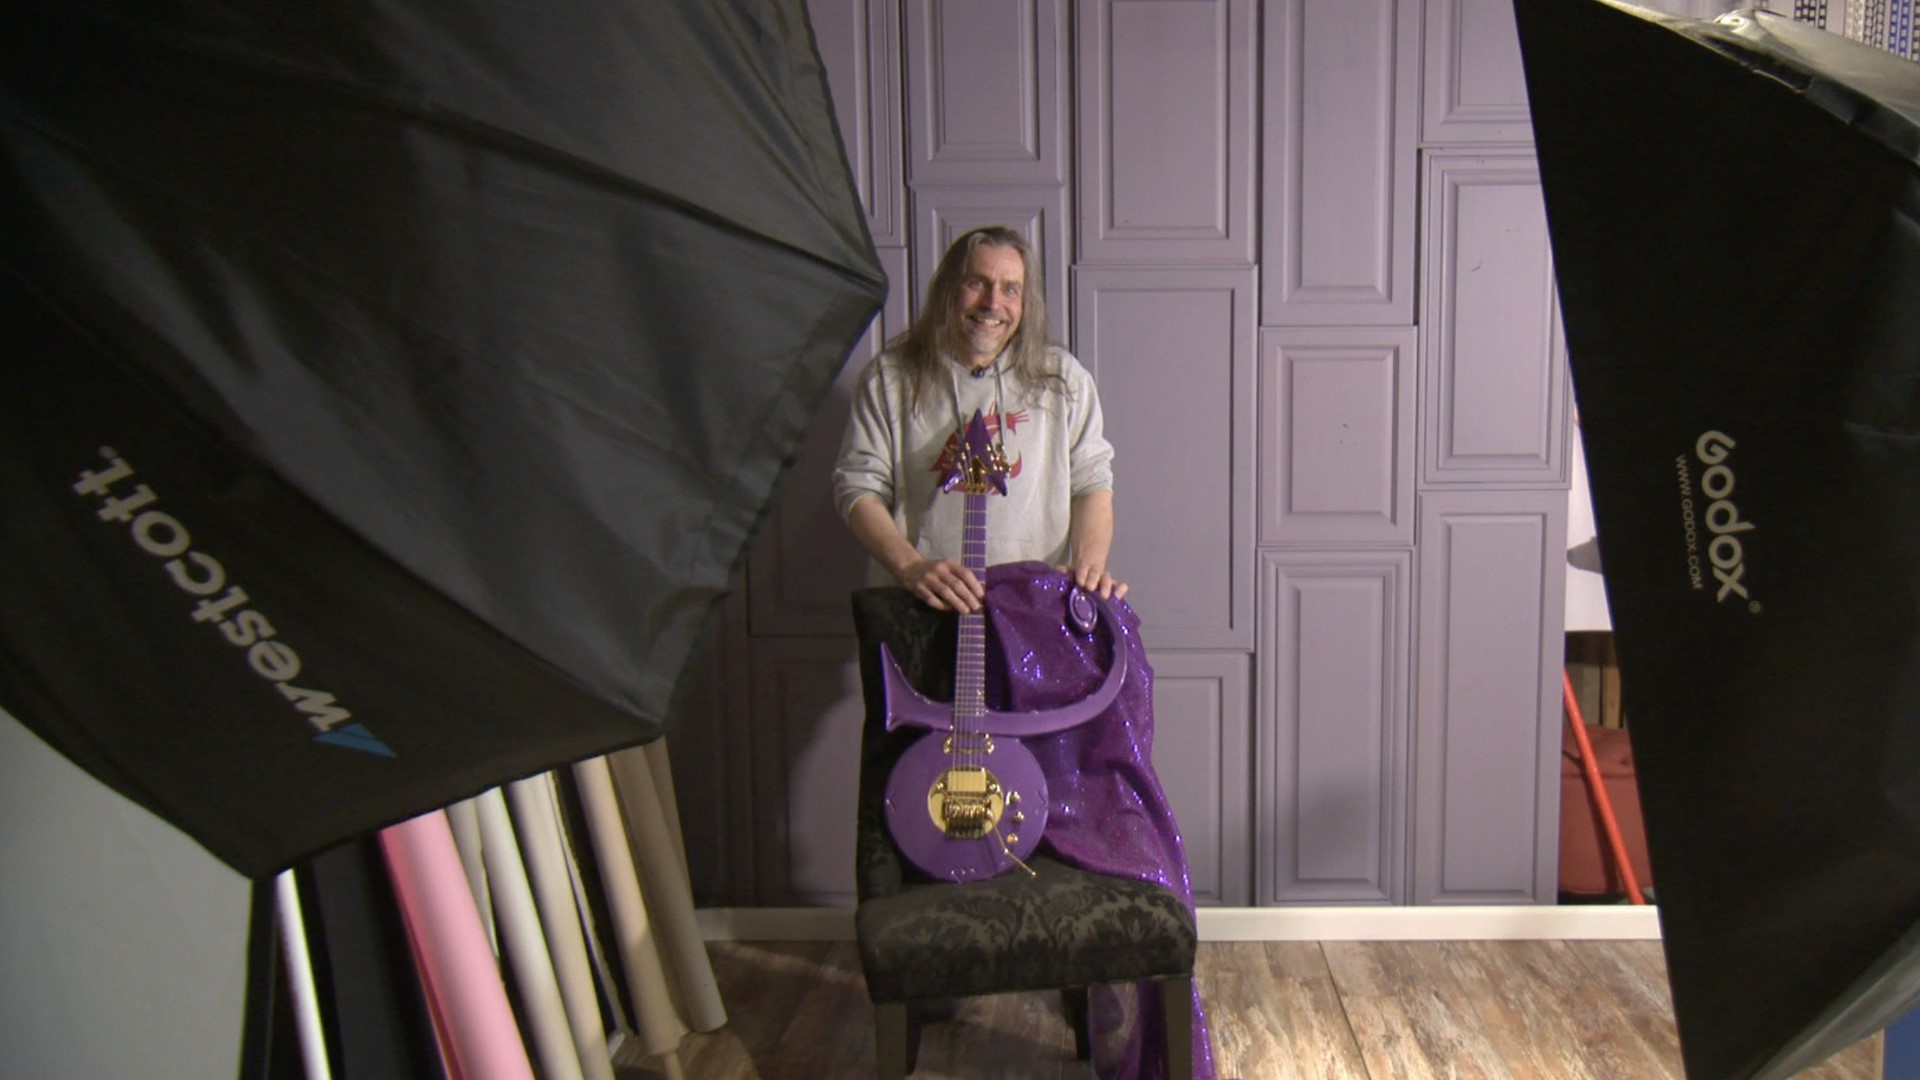 Bellingham's Andy Beech delivers a custom-built beauty to Paisley Park in time for what would have been the musician's 65th birthday. #k5evening